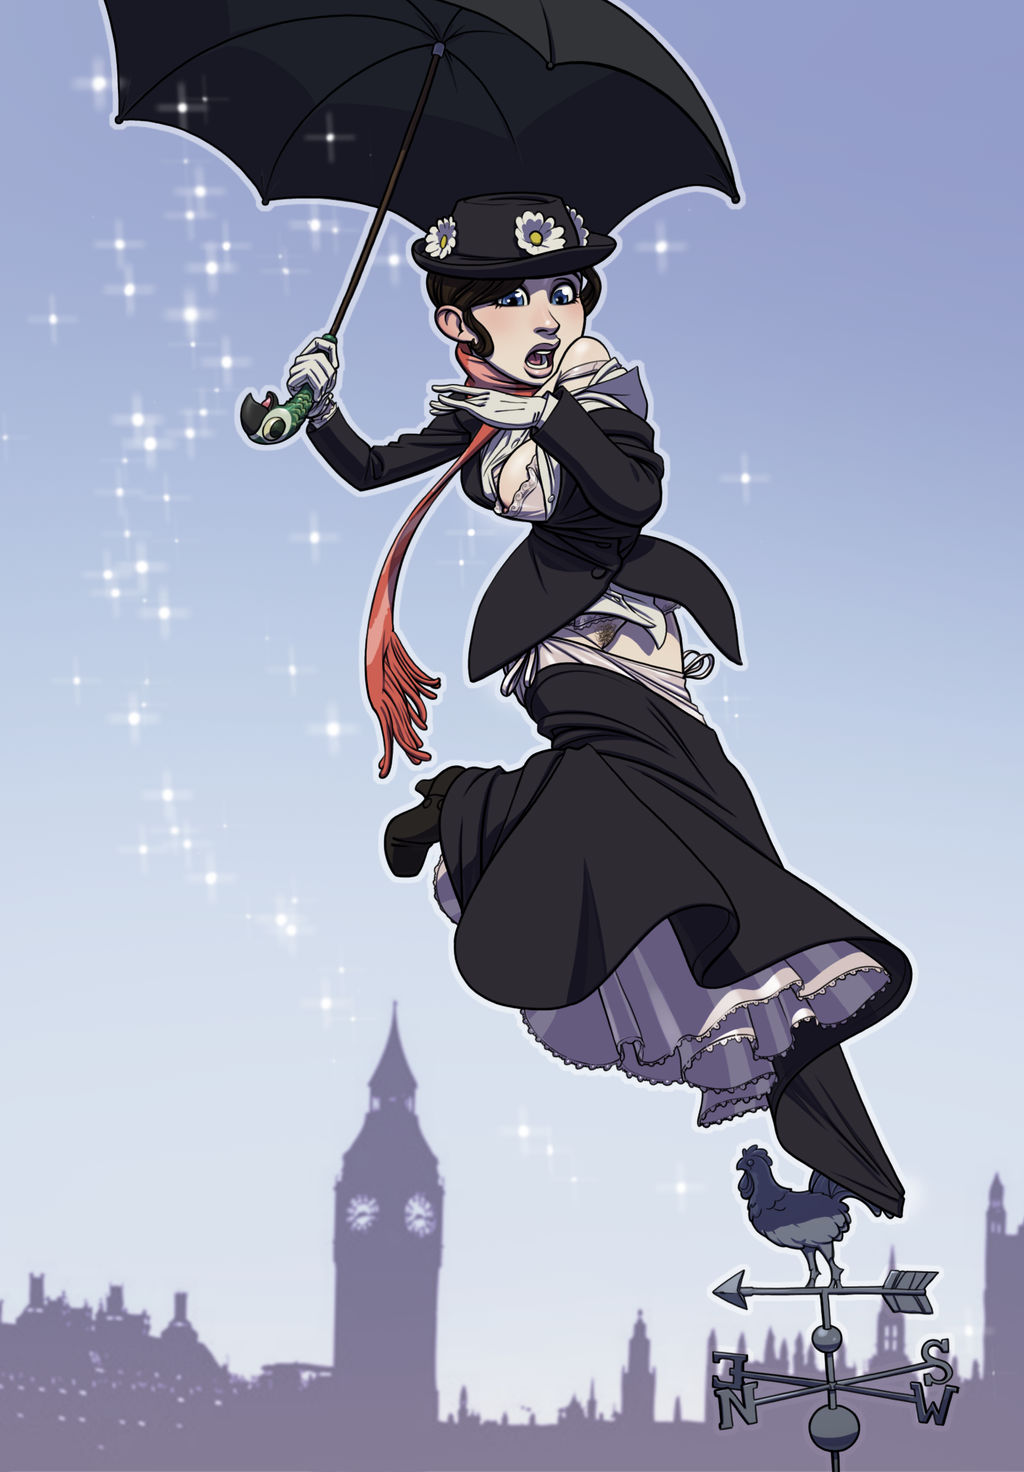 Mary poppins and pops out by gao23.jpg.